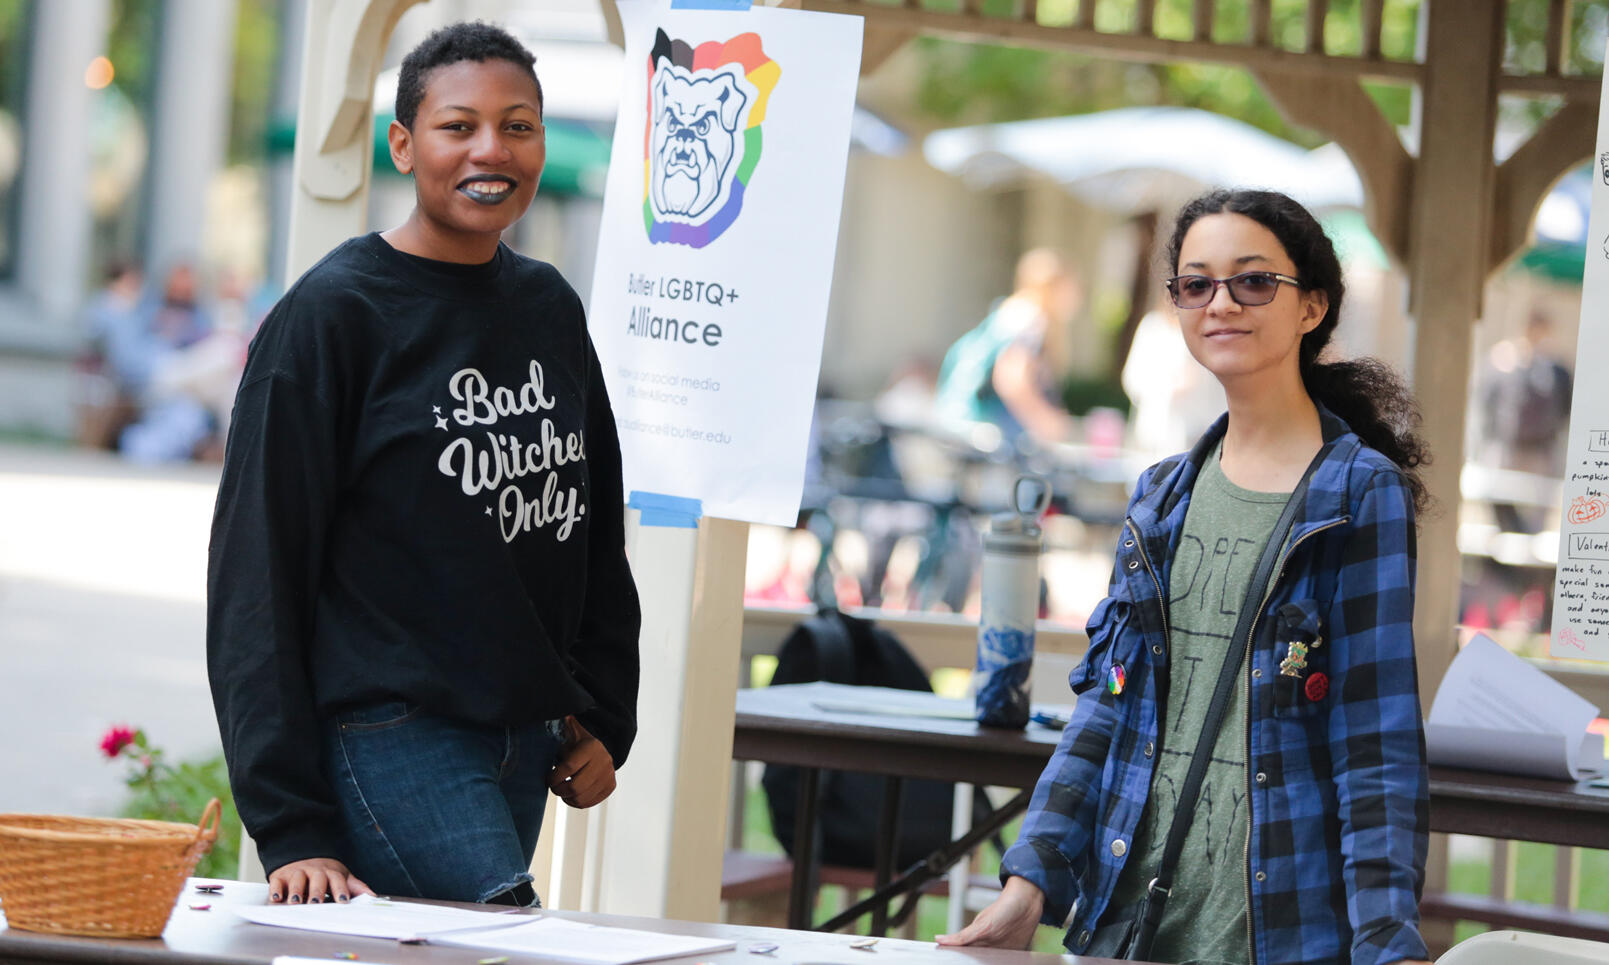 two LGBTQ+ Alliance members with that signage, one in a black sweatshirt reading Bad Witches Only, the other with sunglasses and an blue and black plaid shirt